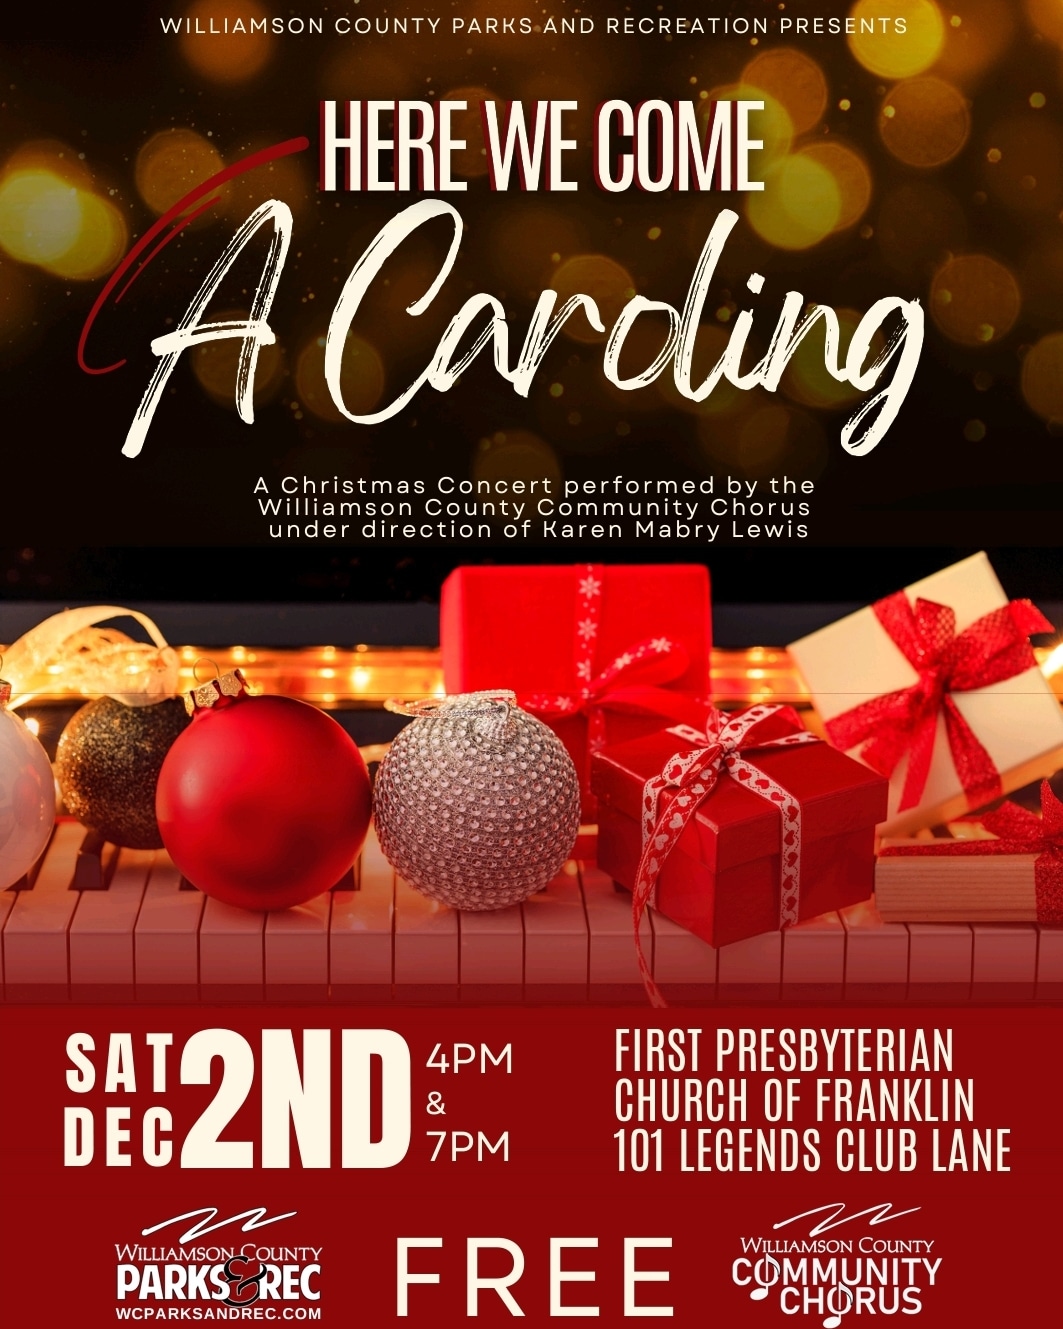 Williamson County Community Chorus Holiday Concert in Franklin, TN is a free event that is fun for all ages.